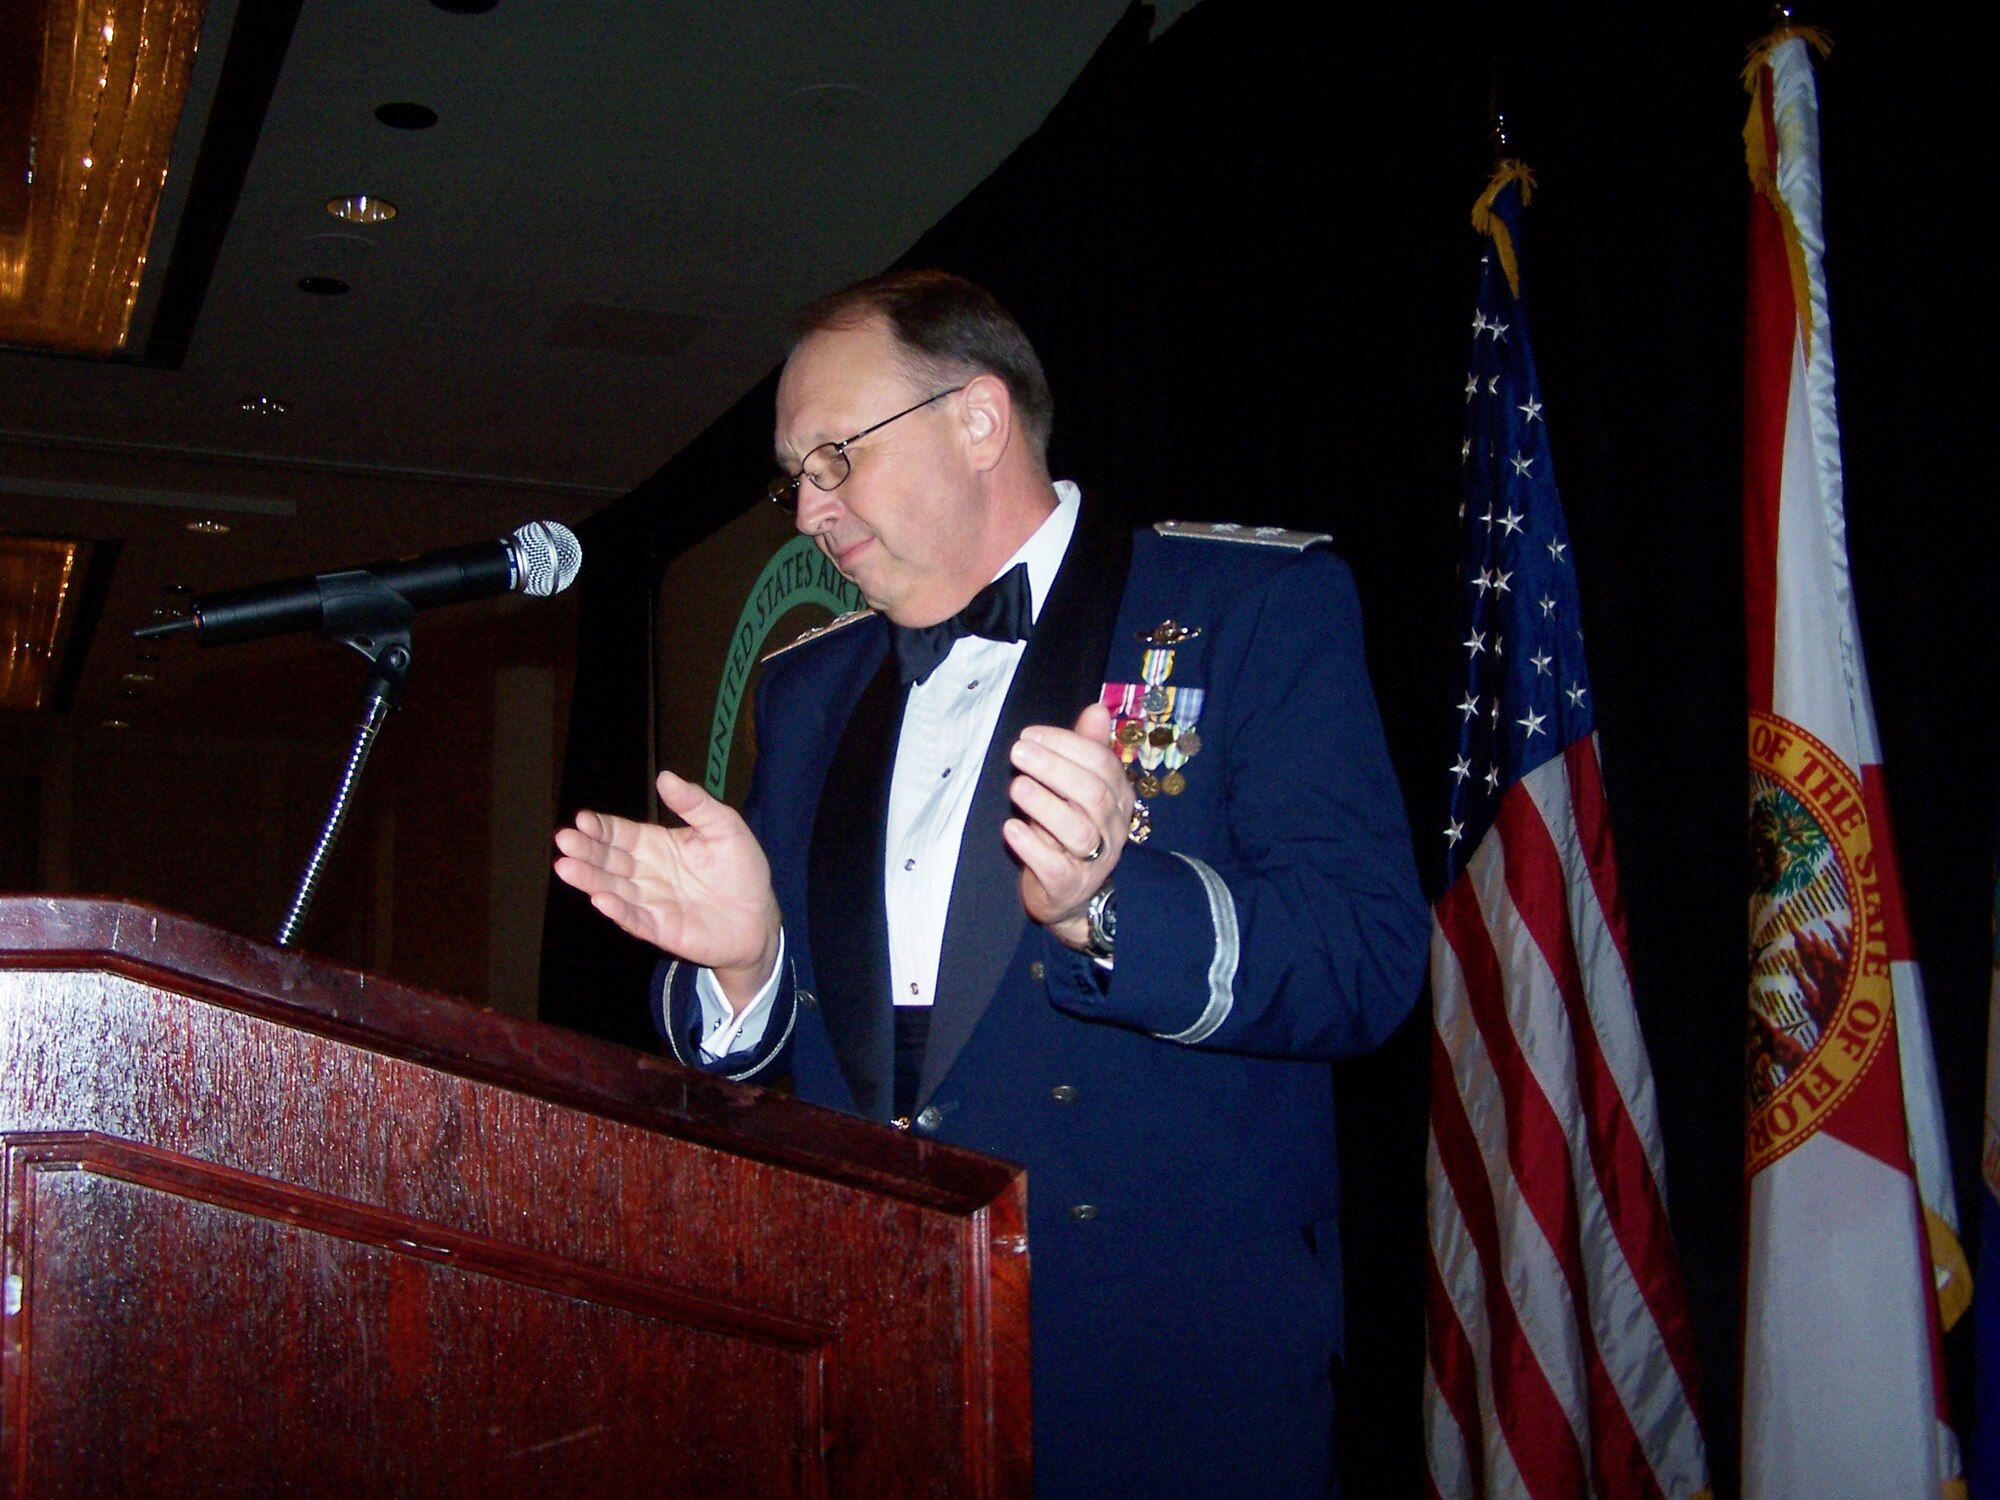 Maj. Gen. Charles Stenner, Assistant Deputy Chief of Staff for Strategic Plans and Programs, Headquarters U.S. Air Force and former 482nd Fighter Wing commander speaks to the 580 military and civilian personnel attending Homestead Air Reserve Base’s "Heritage to Horizons" Air Force ball, Nov. 2, 2007.  The night’s event was part of a year long world-wide celebration commemorating the 60th Anniversary of the U.S. Air Force and local military members recently deployed.  The gala was co-hosted by the 482nd FW, Homestead ARB, Fla., and the Greater Homestead/Florida City Chamber of Commerce Military Affairs Committee. (U.S. Force photo/Lt. Col. Tom Davis)